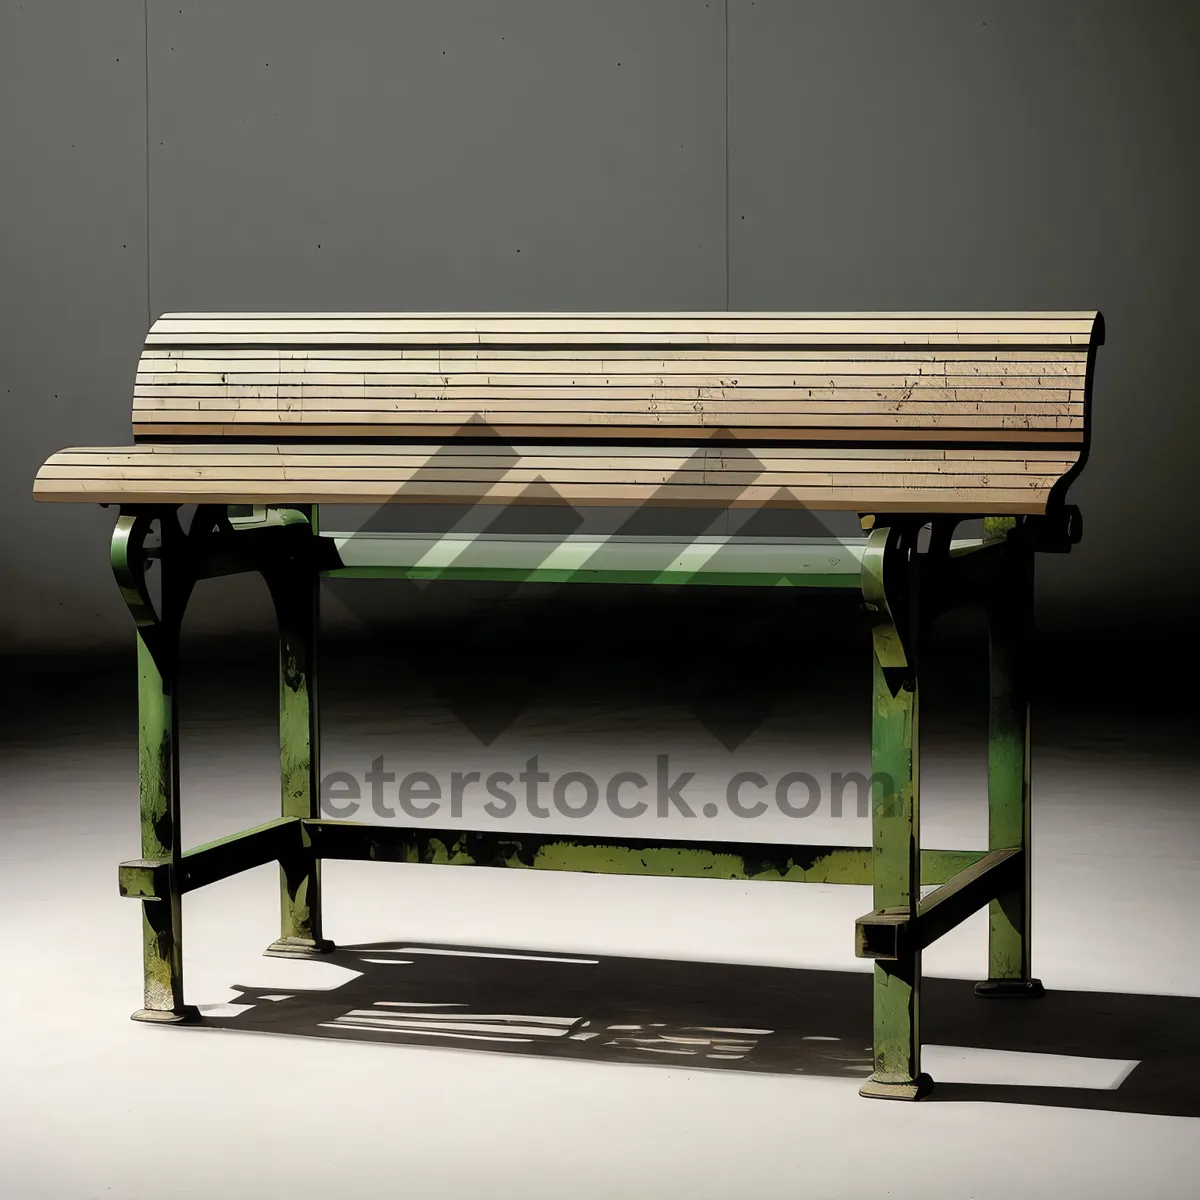 Picture of Wooden Park Bench for Relaxation and Rest